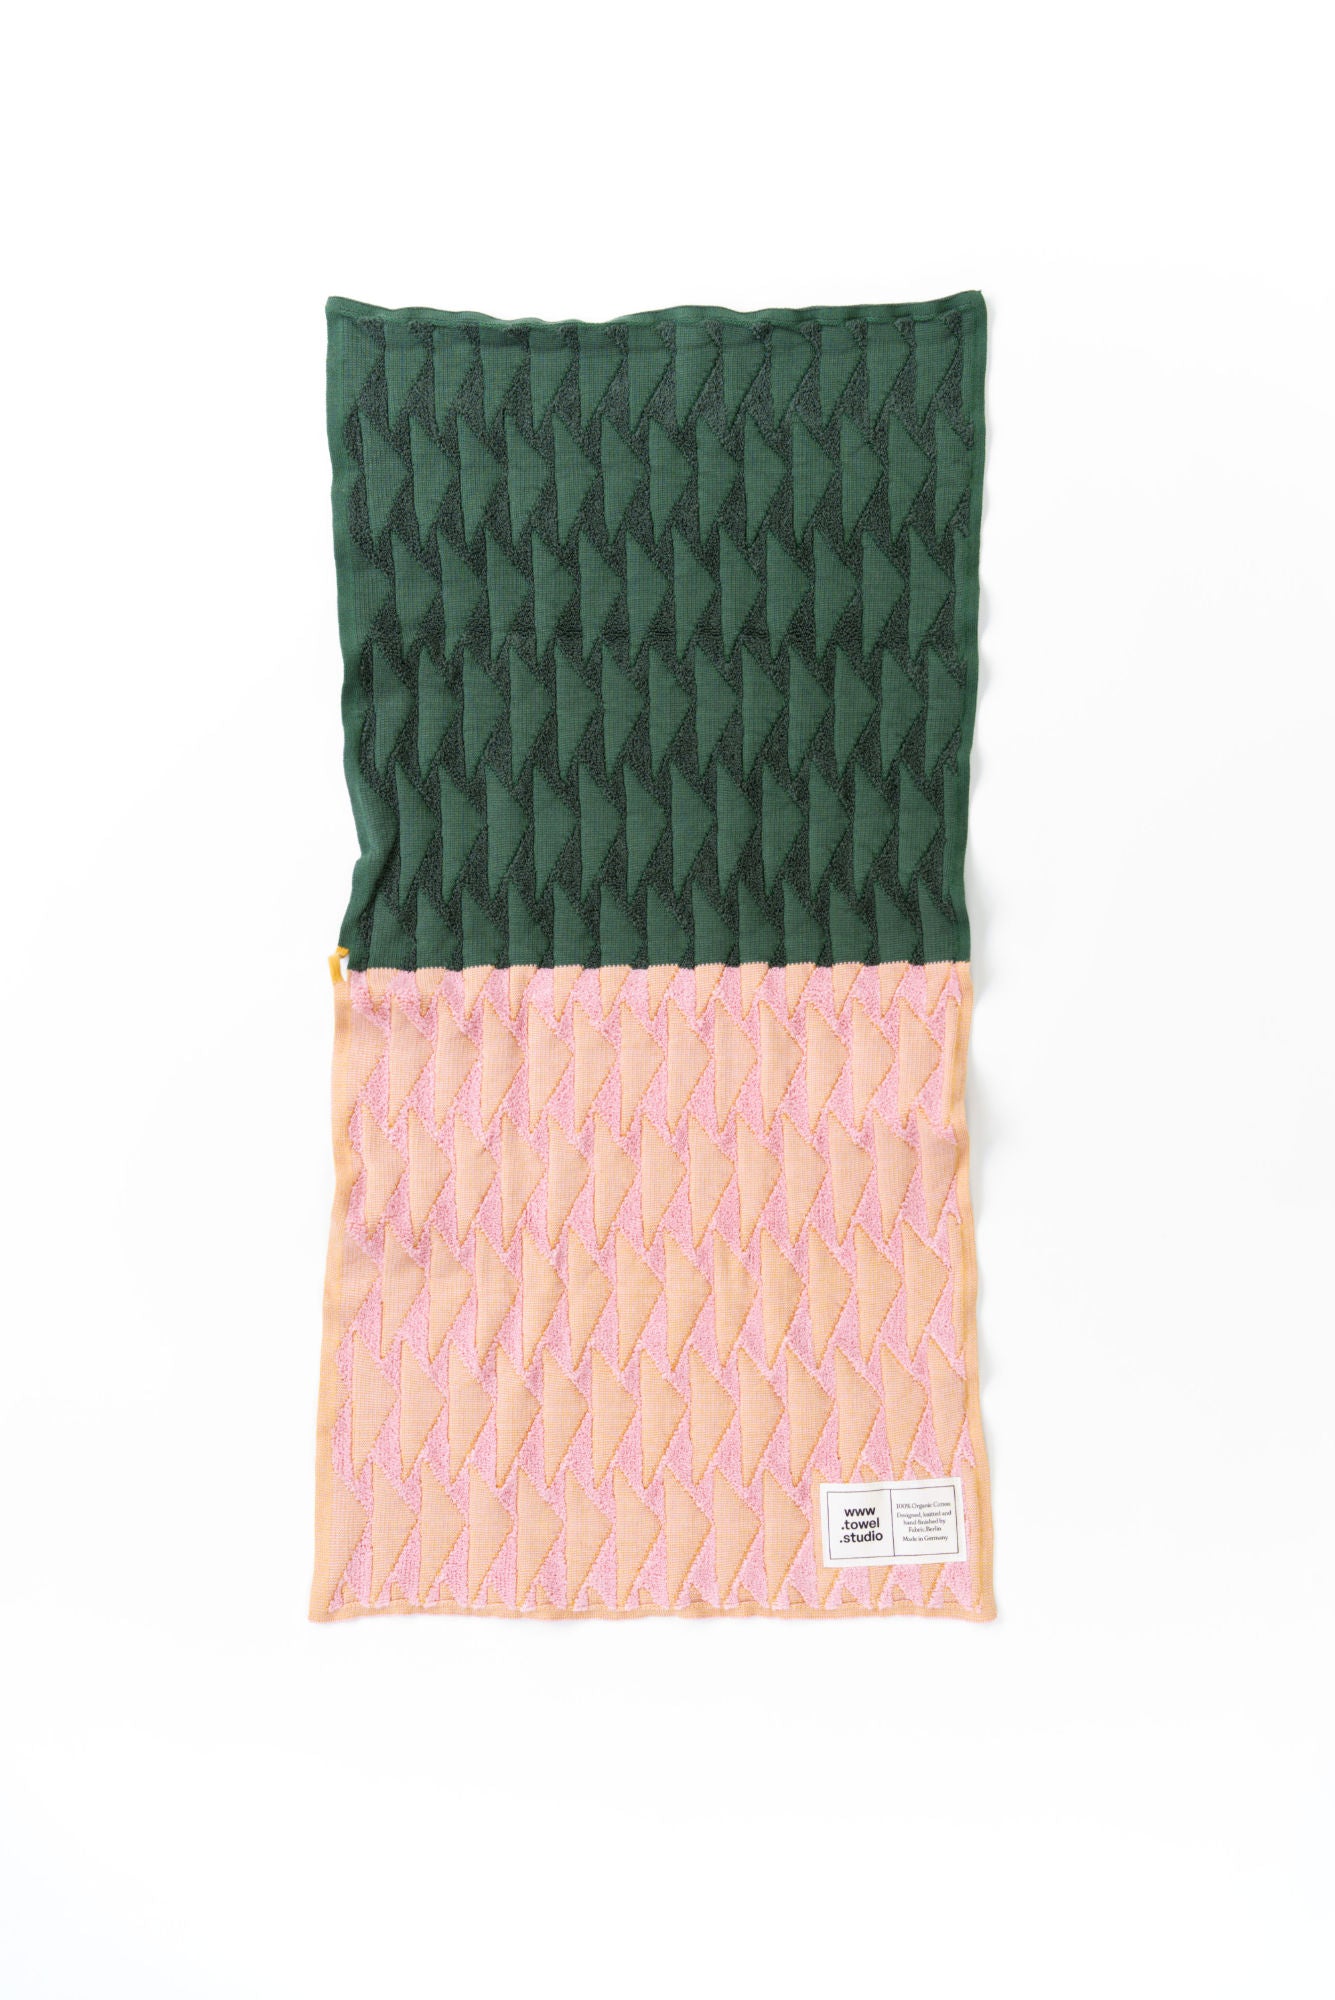 Forest Towel | Apricot Leaf